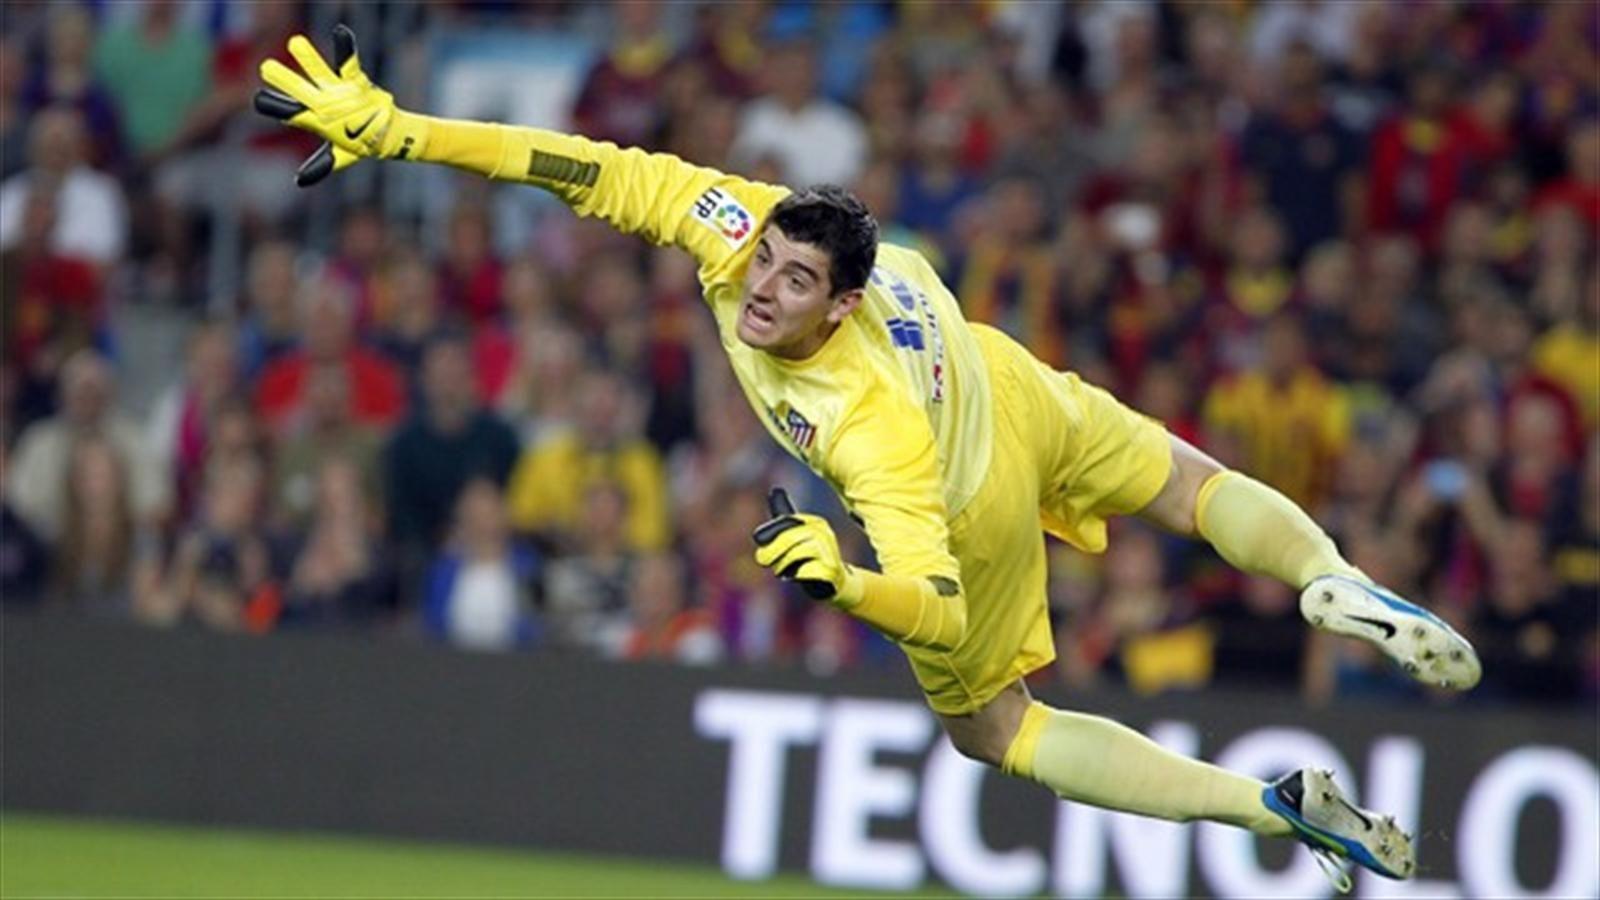 Wallpaper ID 326042  Sports Thibaut Courtois Phone Wallpaper Real Madrid  CF 1440x2560 free download